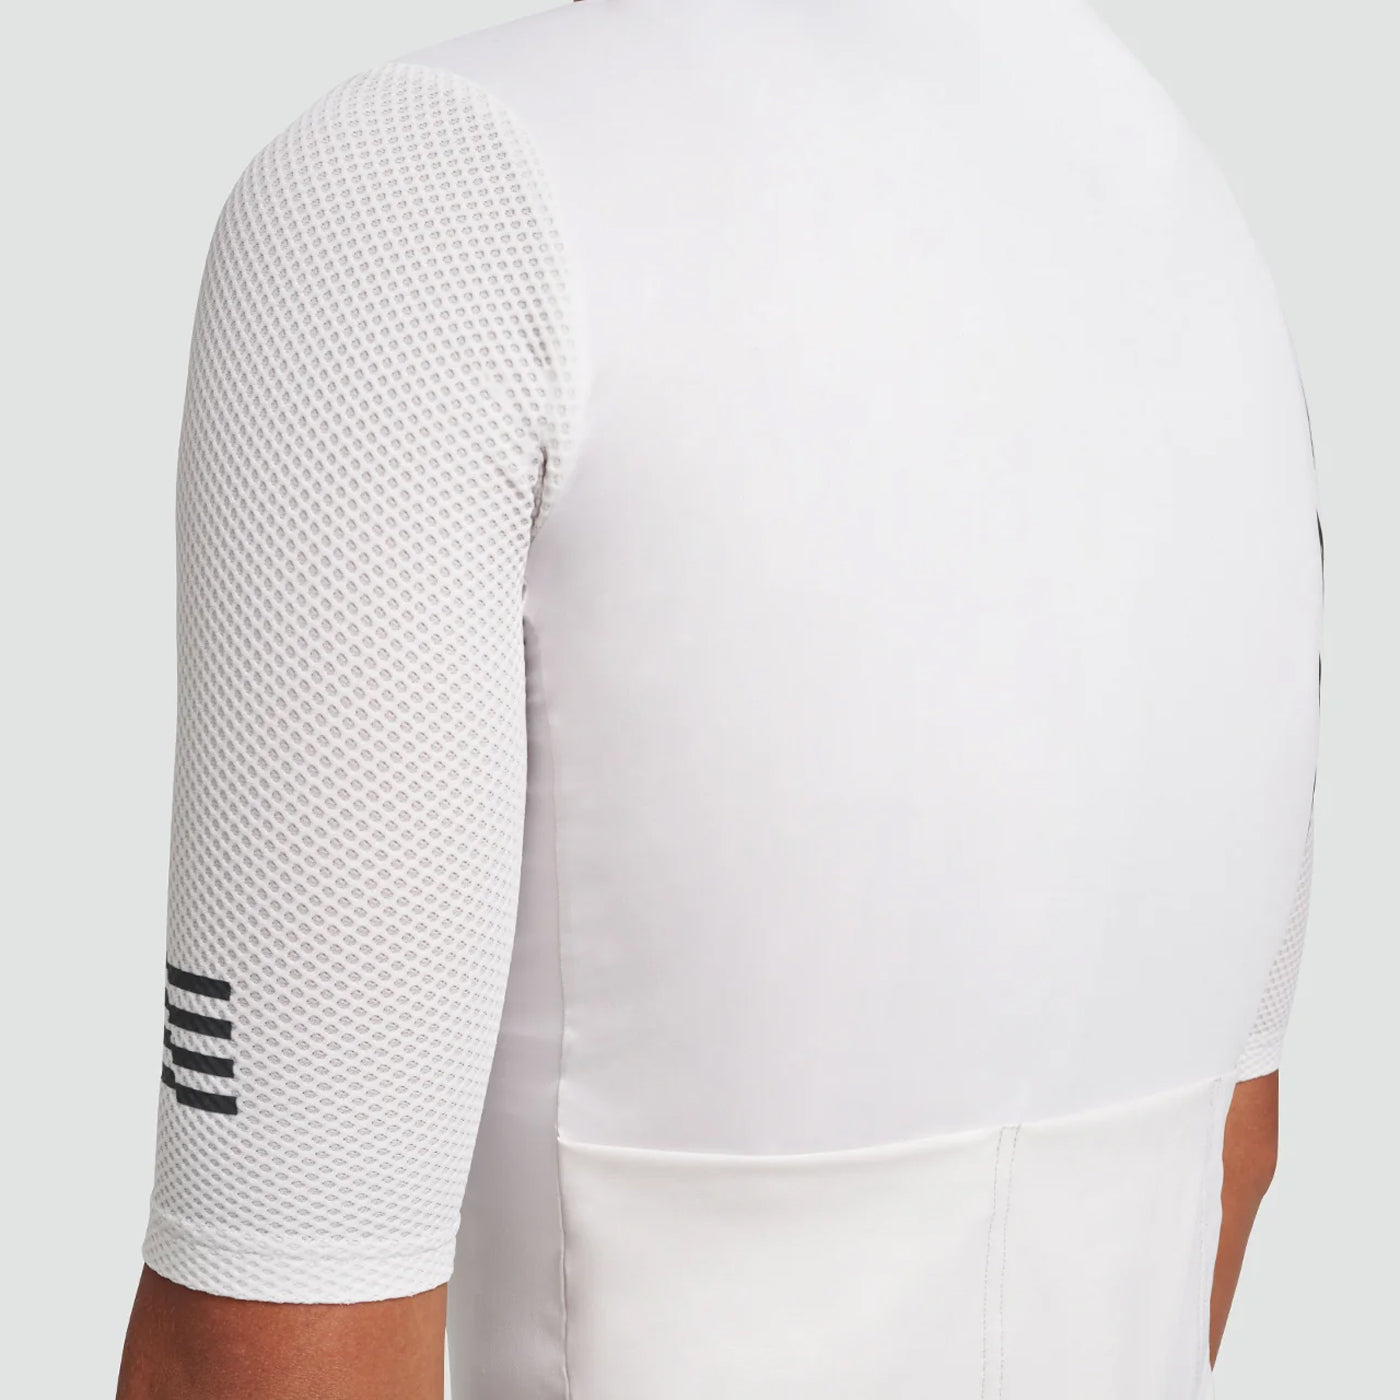 Maap Evade Pro Base 2.0 jersey - White | All4cycling